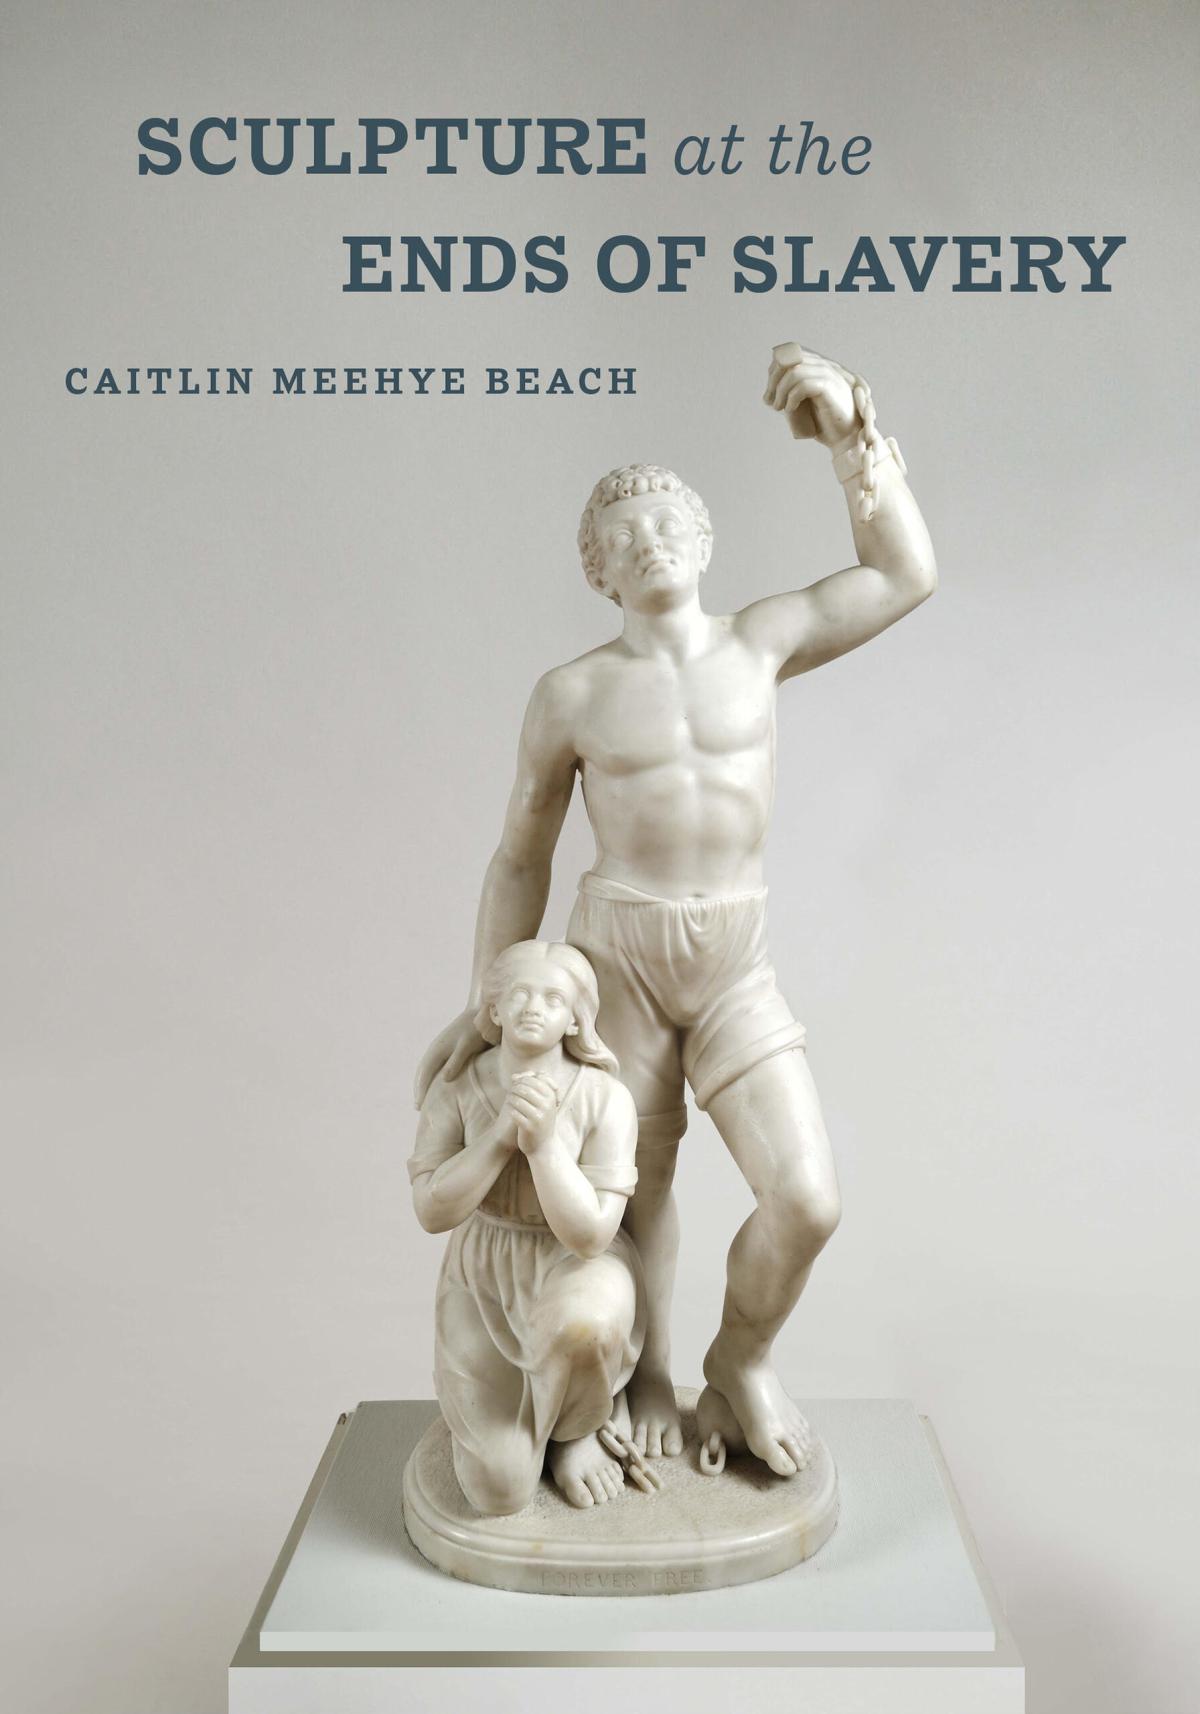 Book cover of Sculpture at the Ends of Slavery by Caitlin Beech